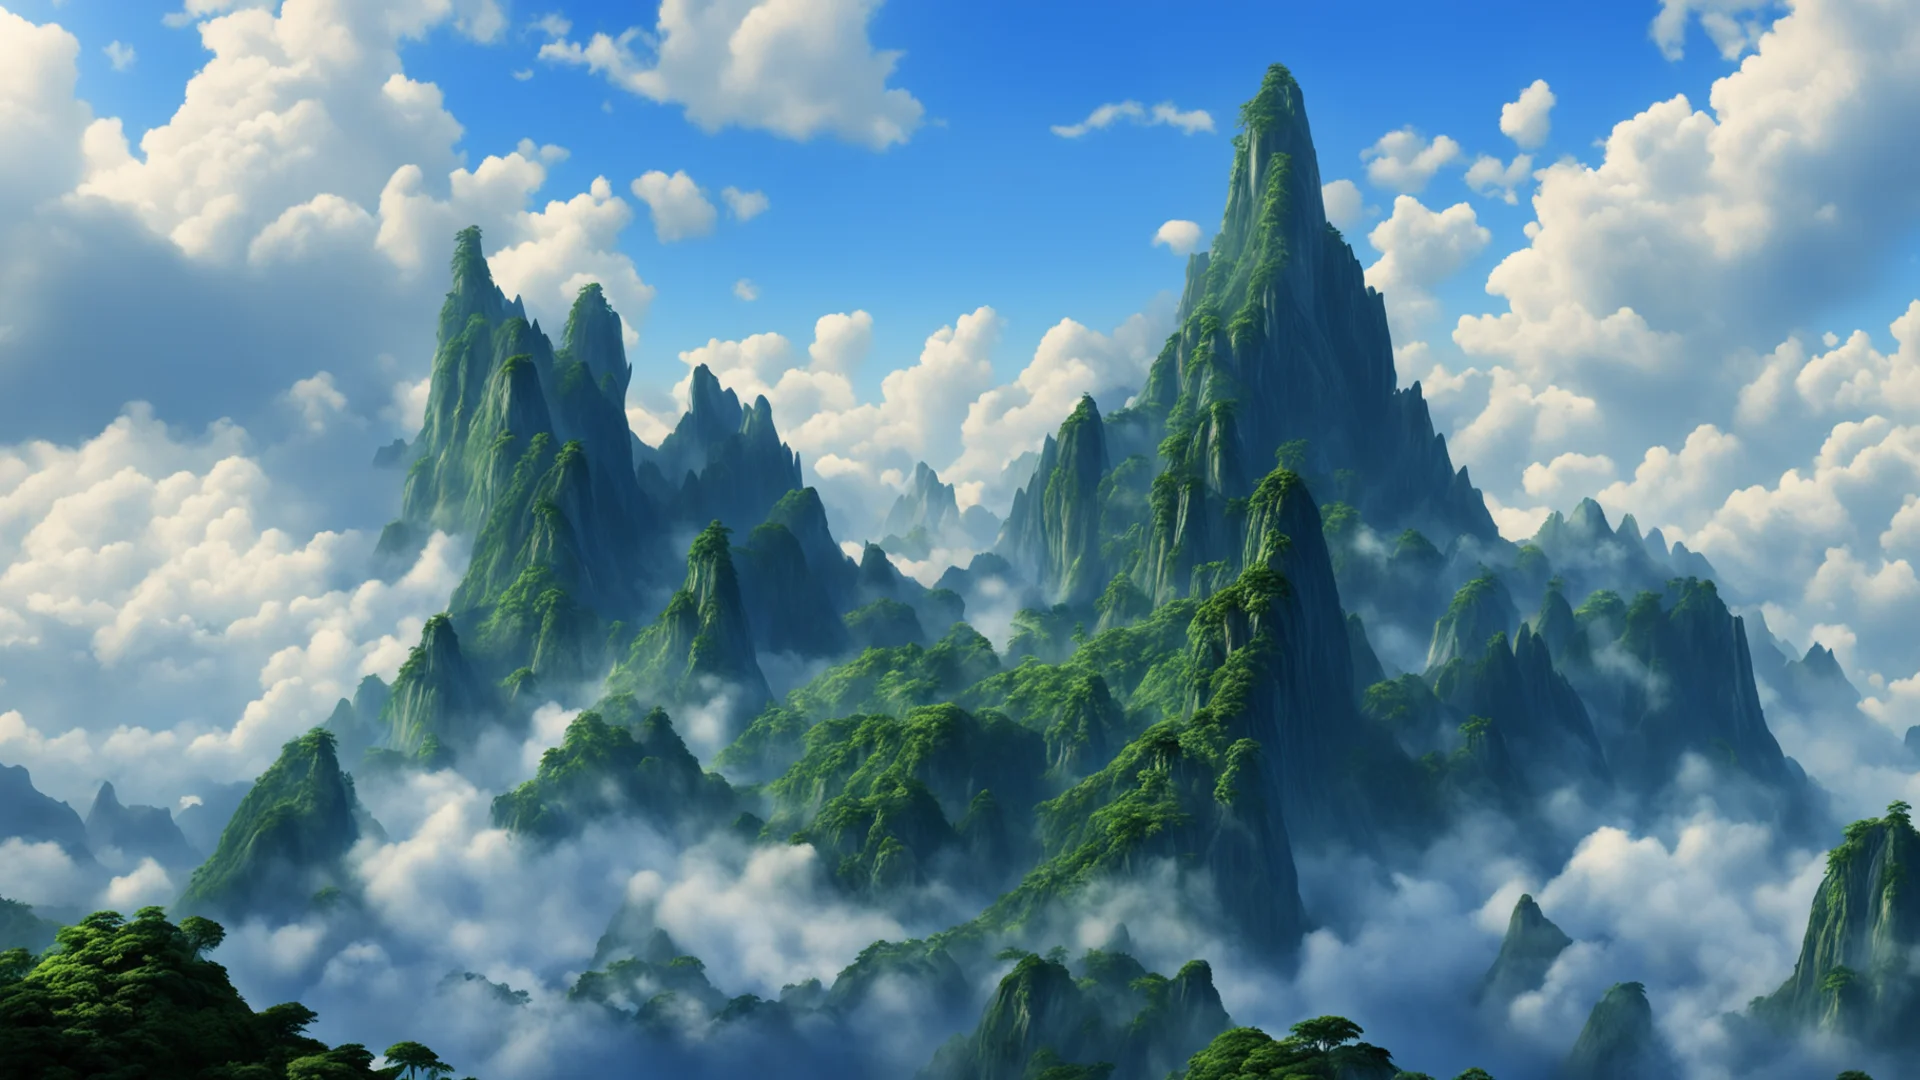 aiflying mountains from the movie avatar. superrealism wide